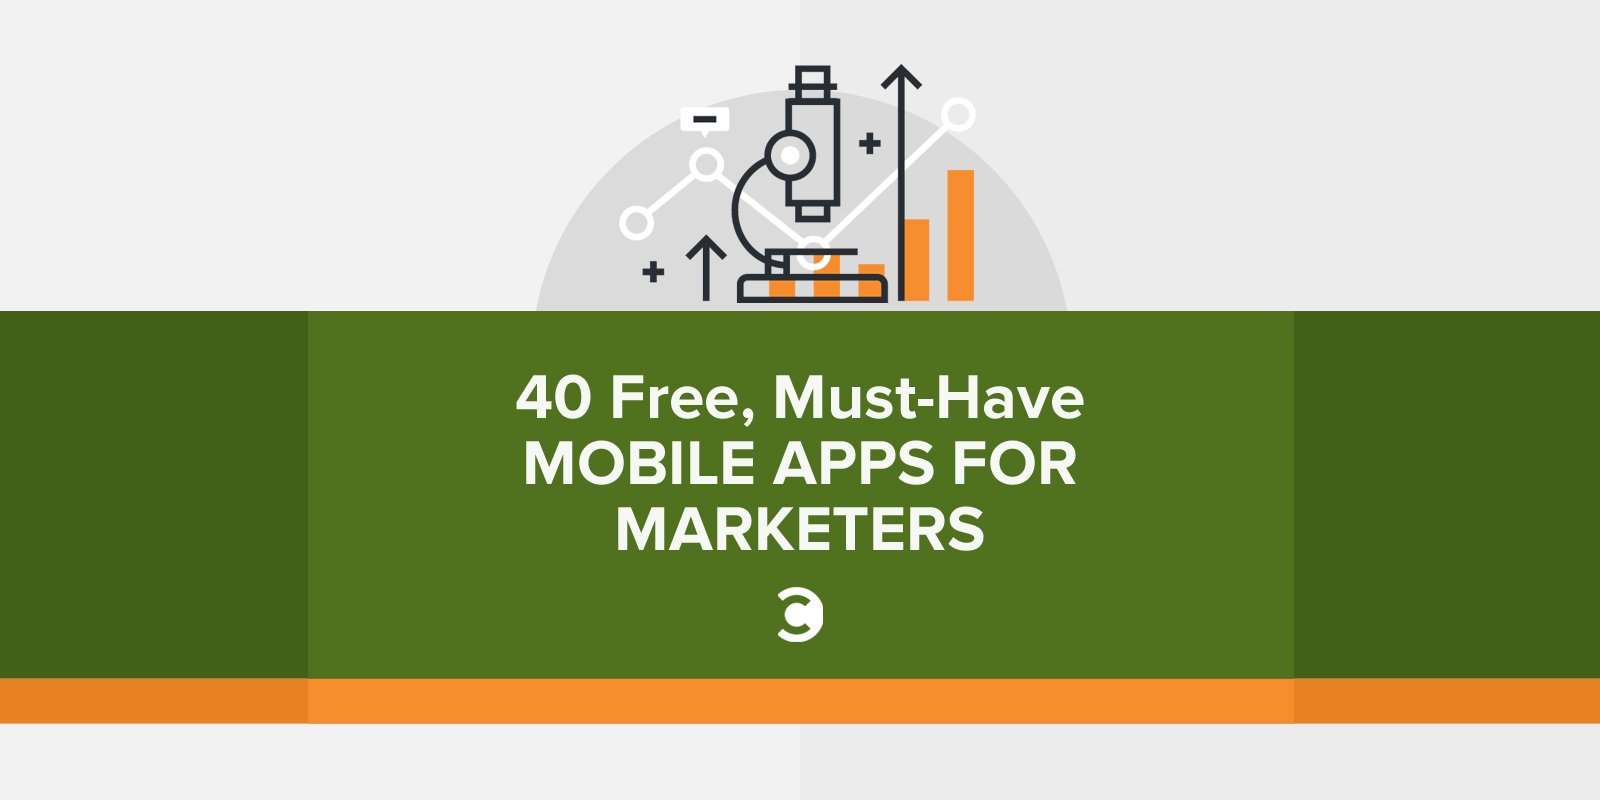 40 Free, Must-Have Mobile Apps for Marketers